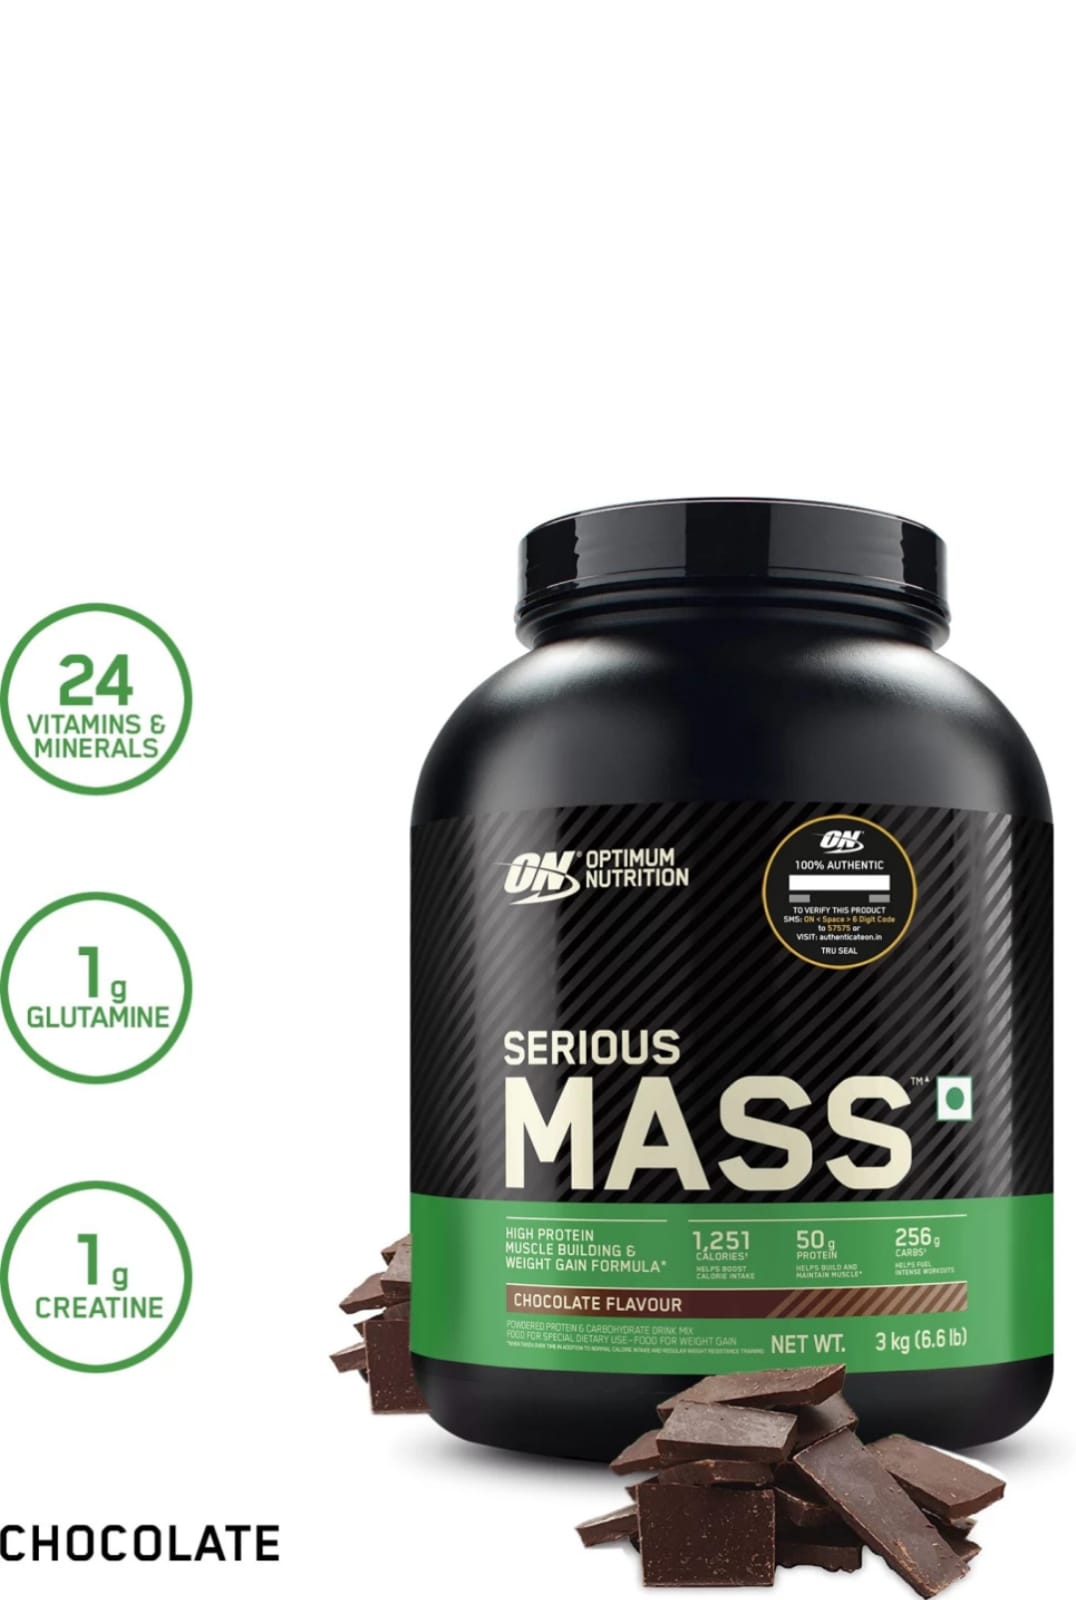 Optimum nutrition On serious mass gainer 6lbs, (Chocolate flavour)